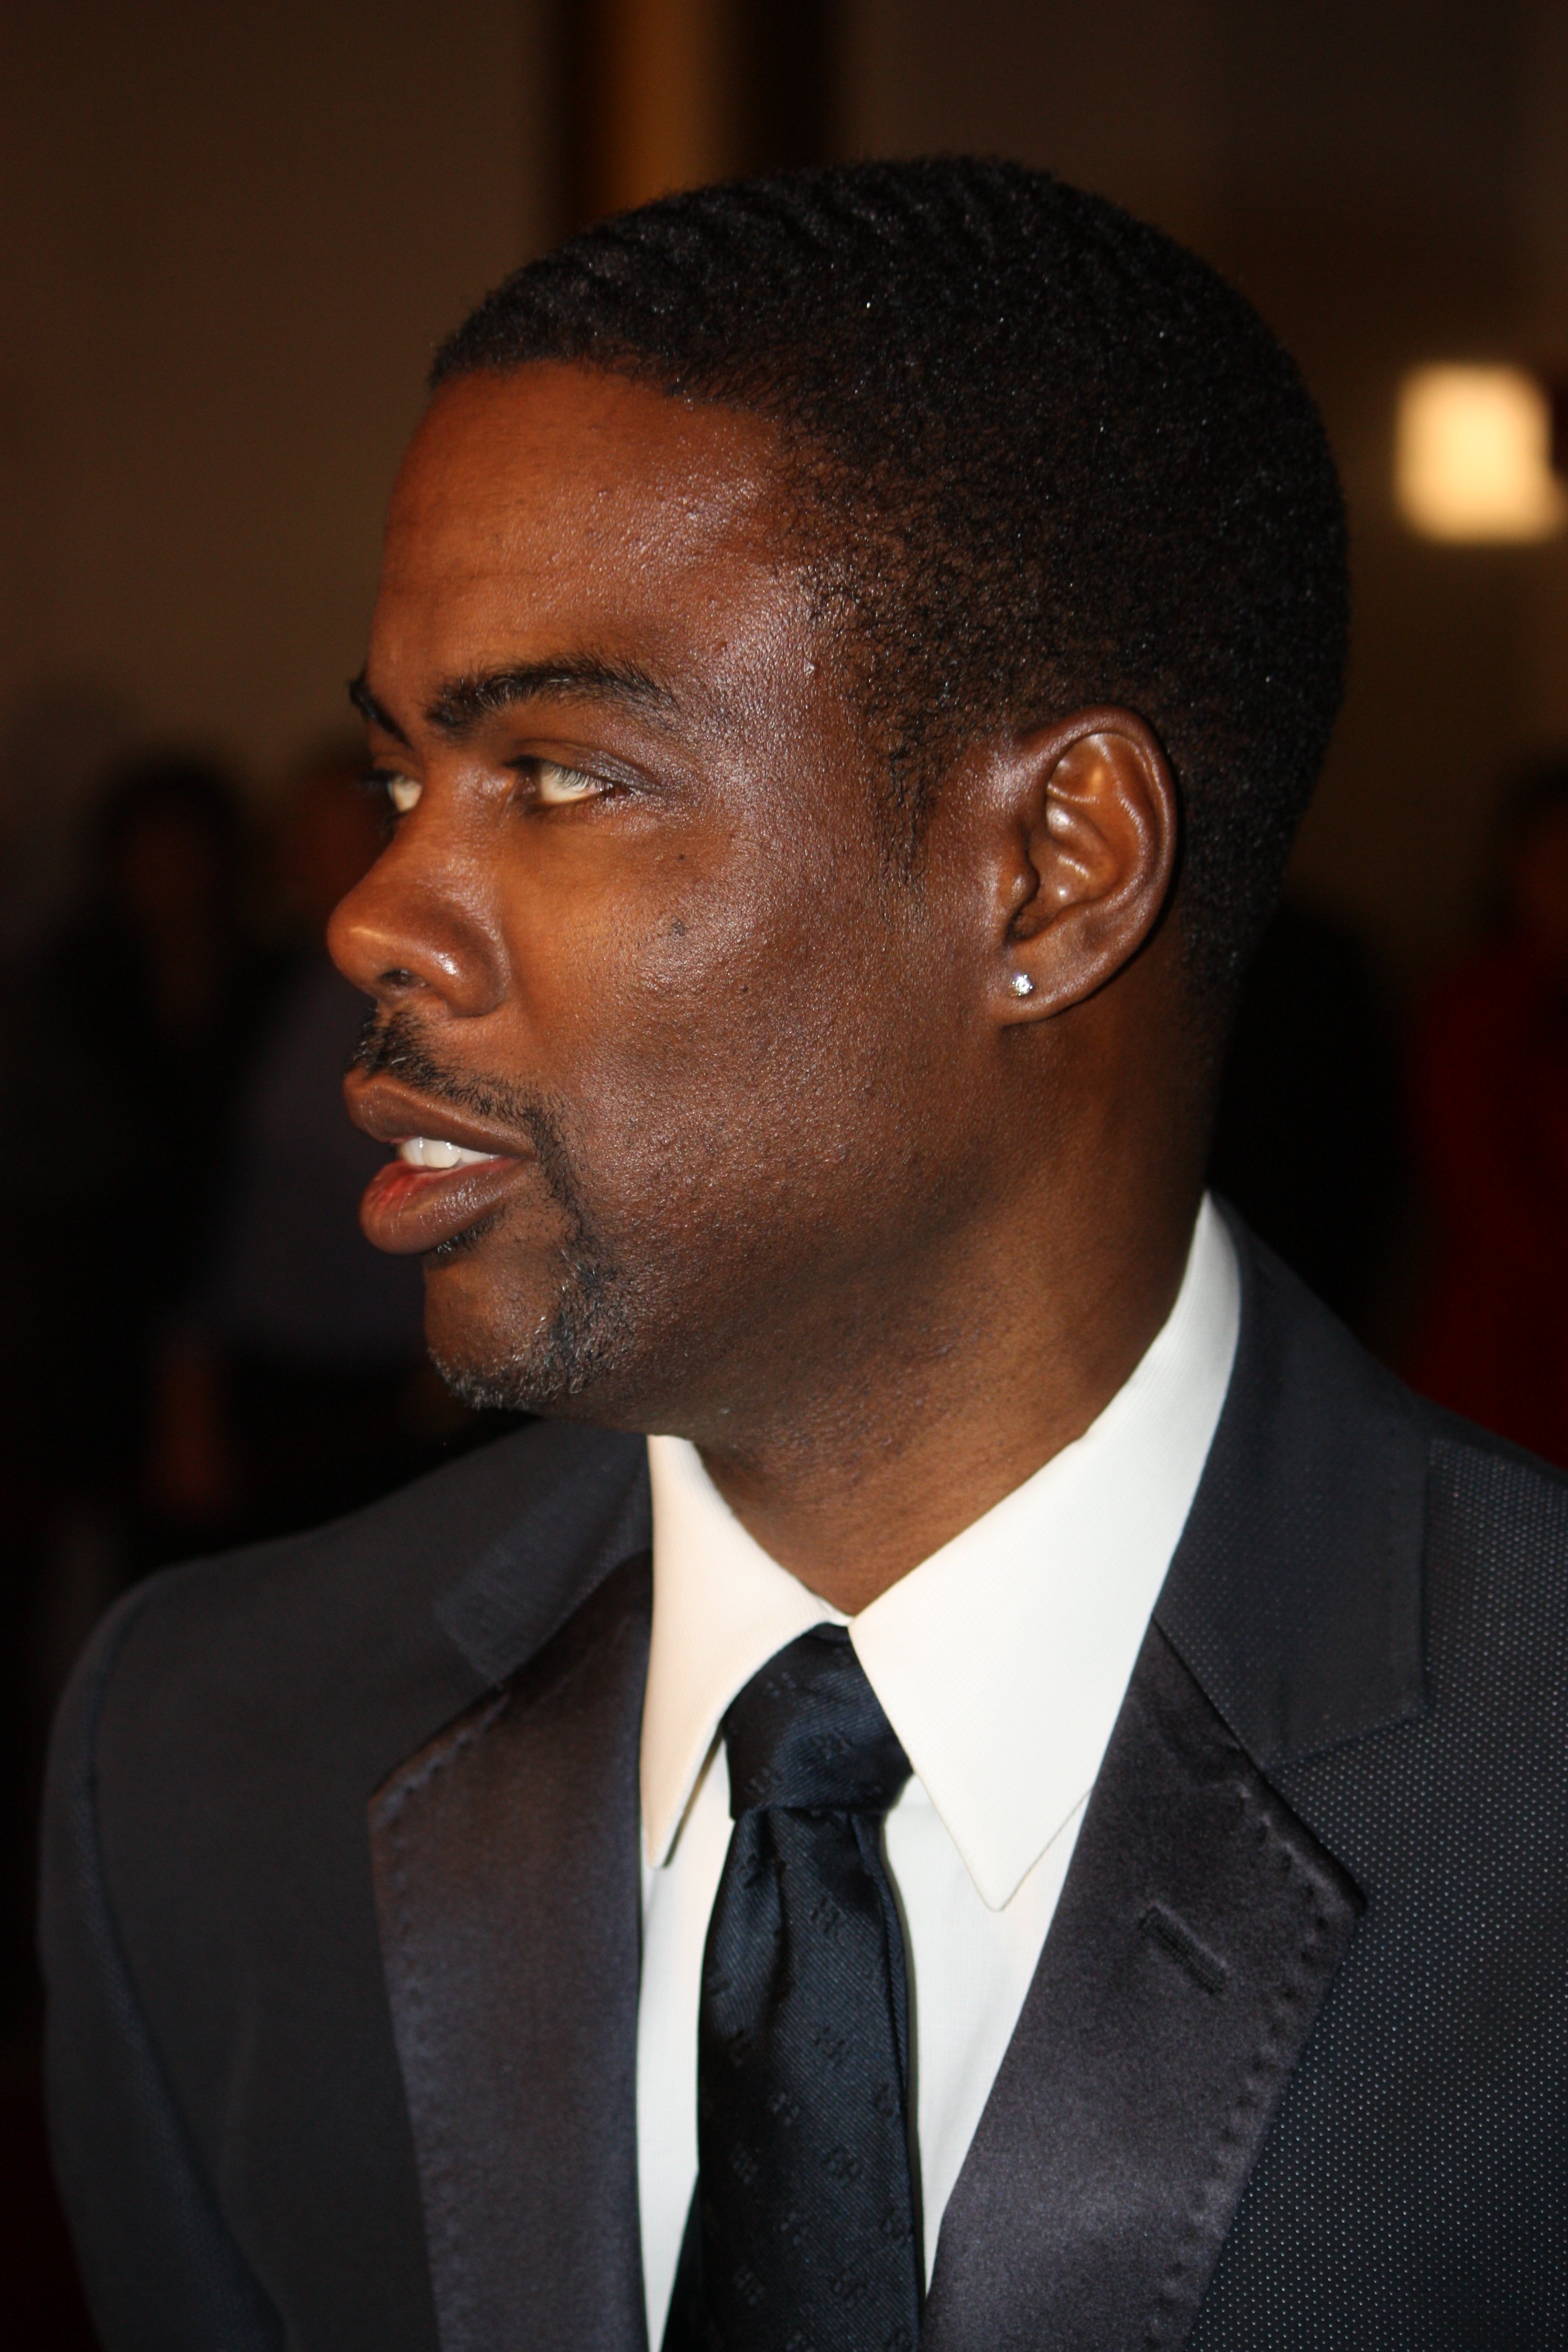 Stars like comedian Chris Rock helped honor Bill Cosby on Monday, October 26, 2009, during a ceremony at the John F. Kennedy Center for the Performing Arts. Cosby received the Mark Twain Prize for American Humor after refusing to accept the award twice in the past.